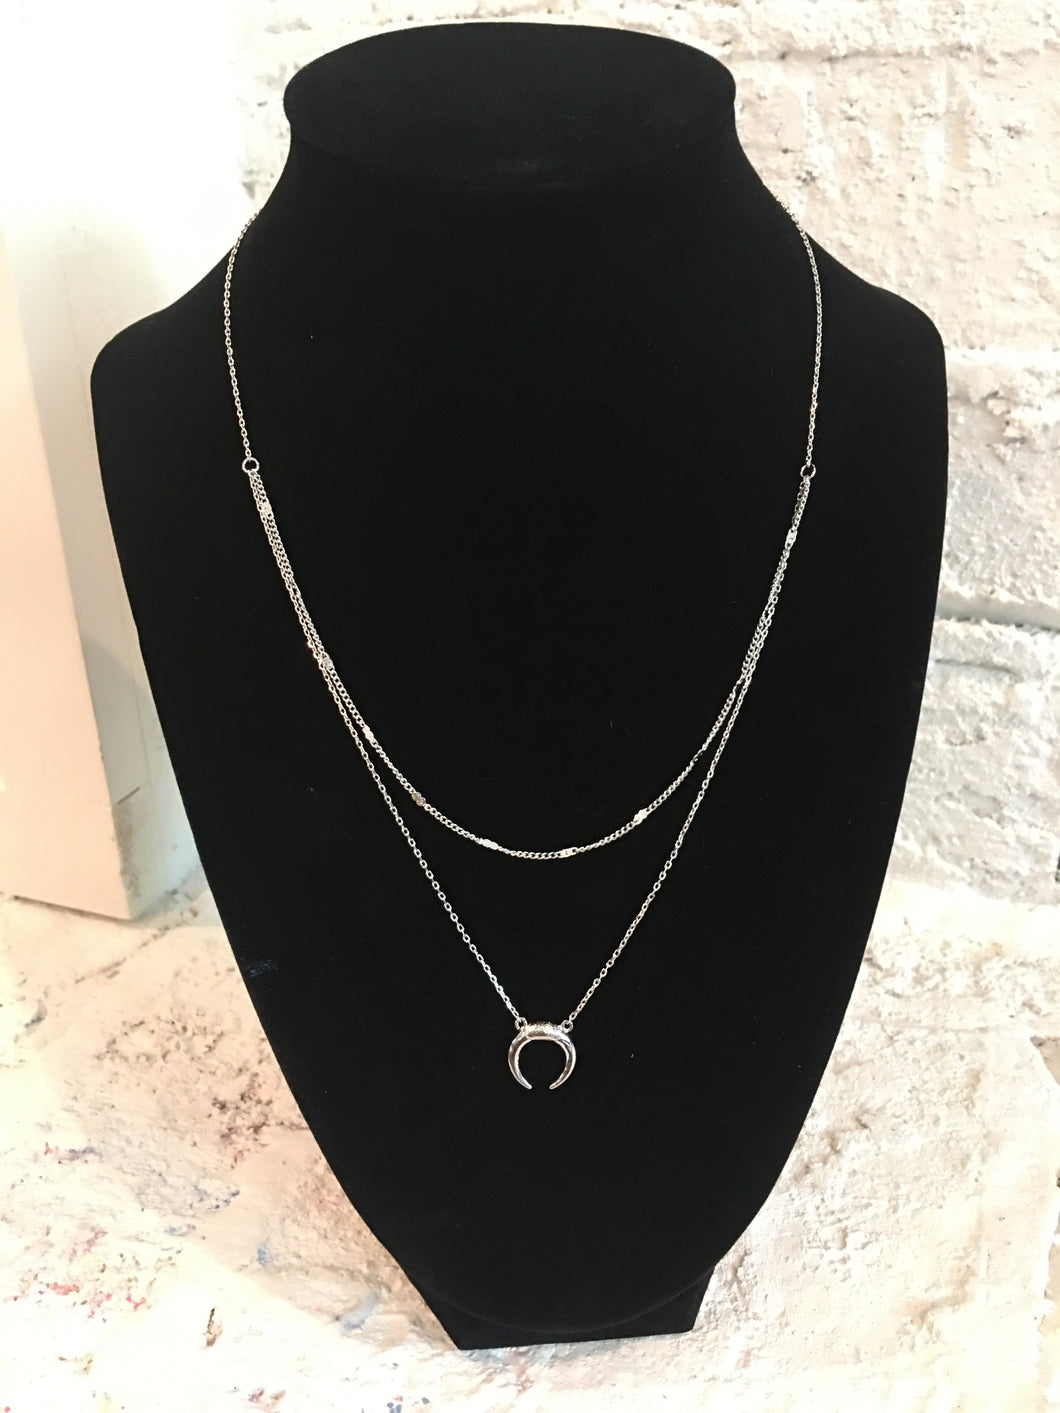 Silver Layered Necklace with Charm